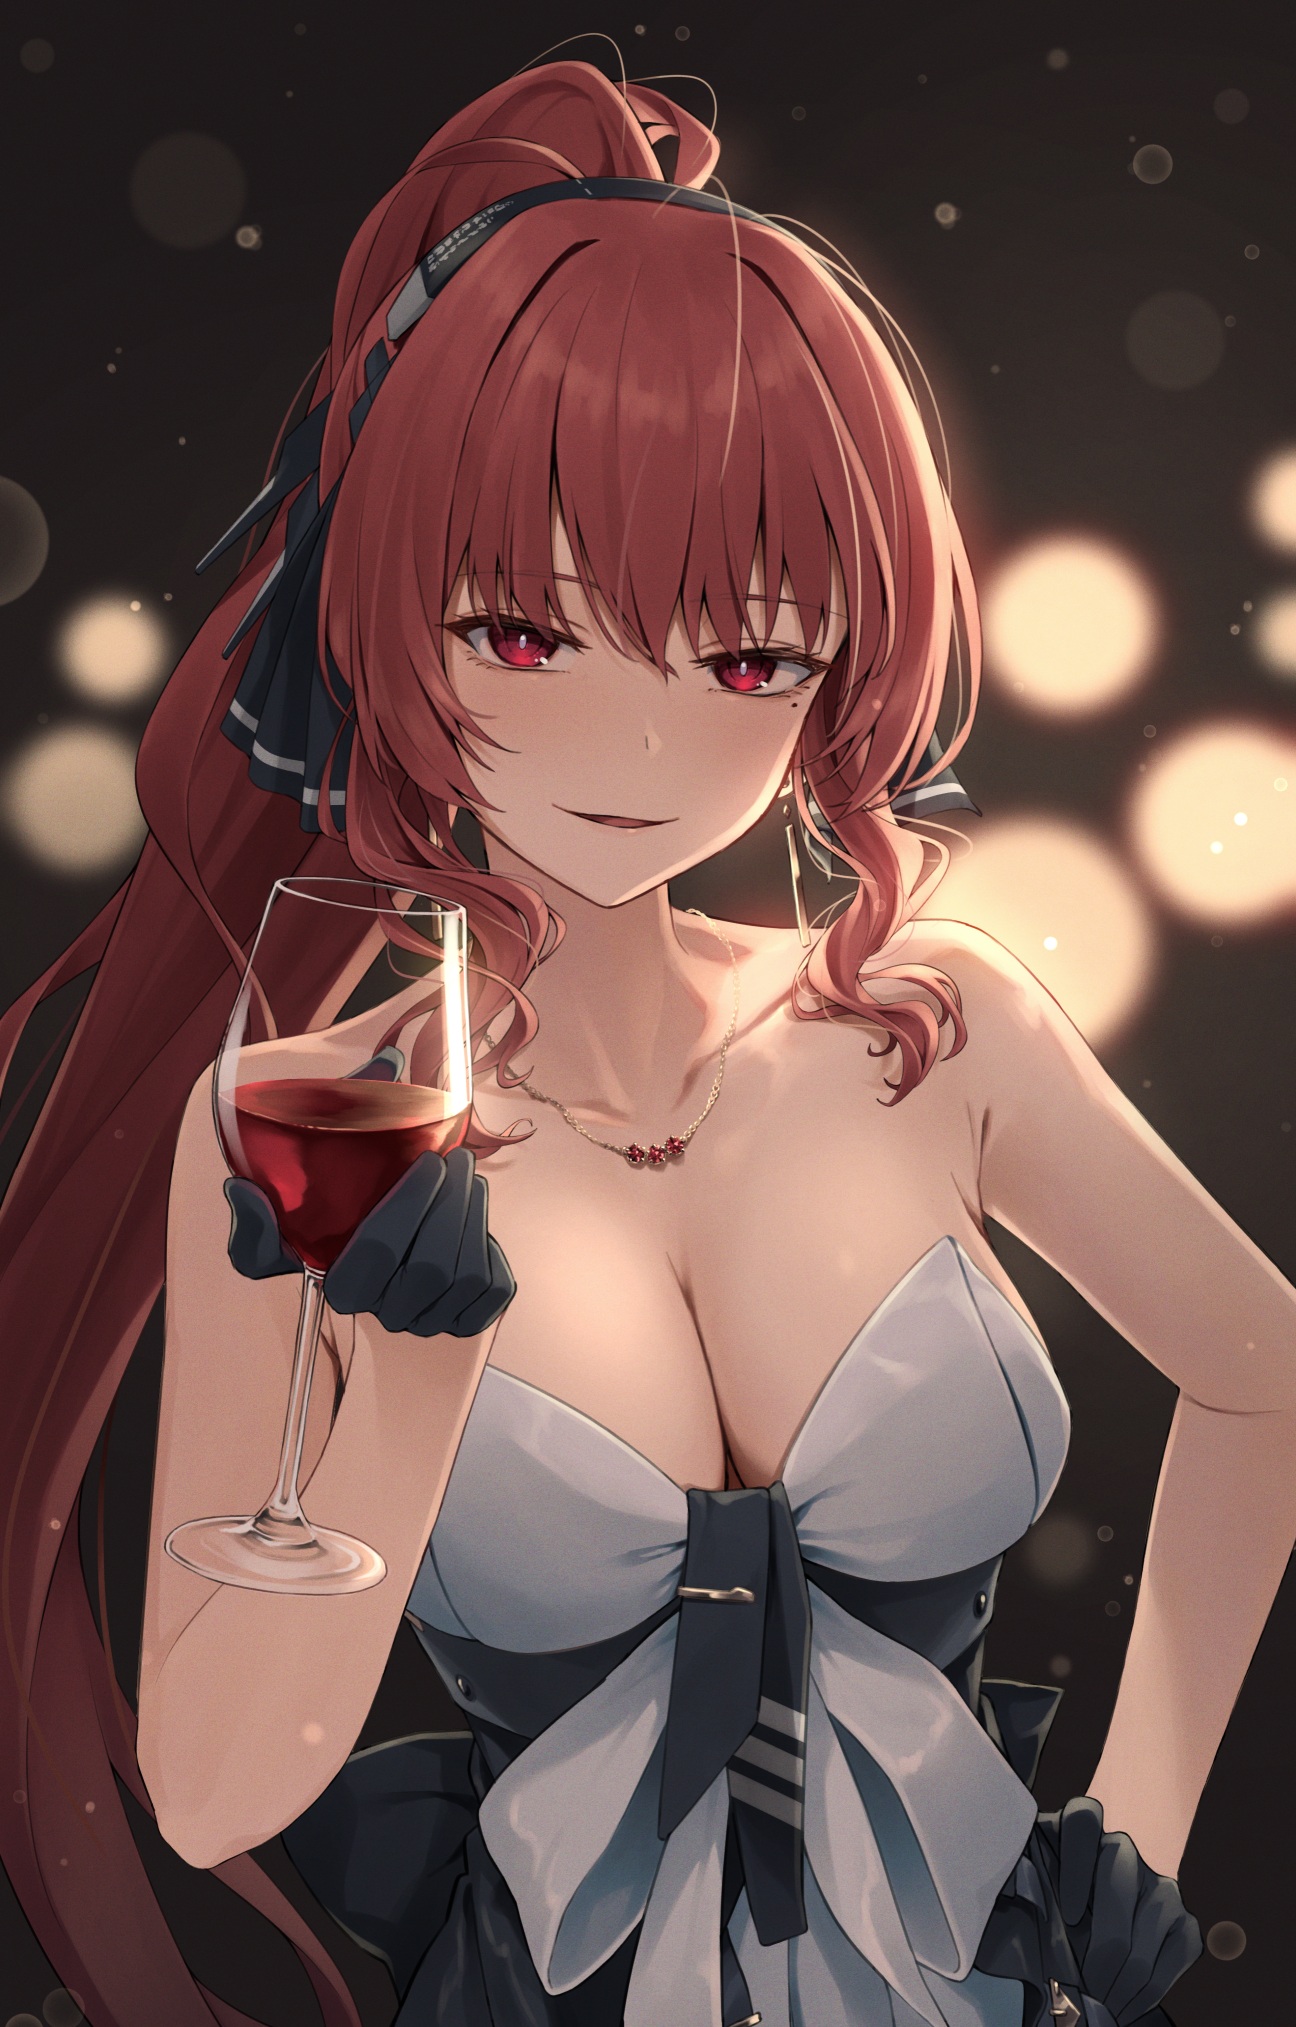 Anime 1296x2027 anime anime girls portrait display redhead red eyes ponytail wine wine glass gloves cleavage big boobs dress necklace Pixiv